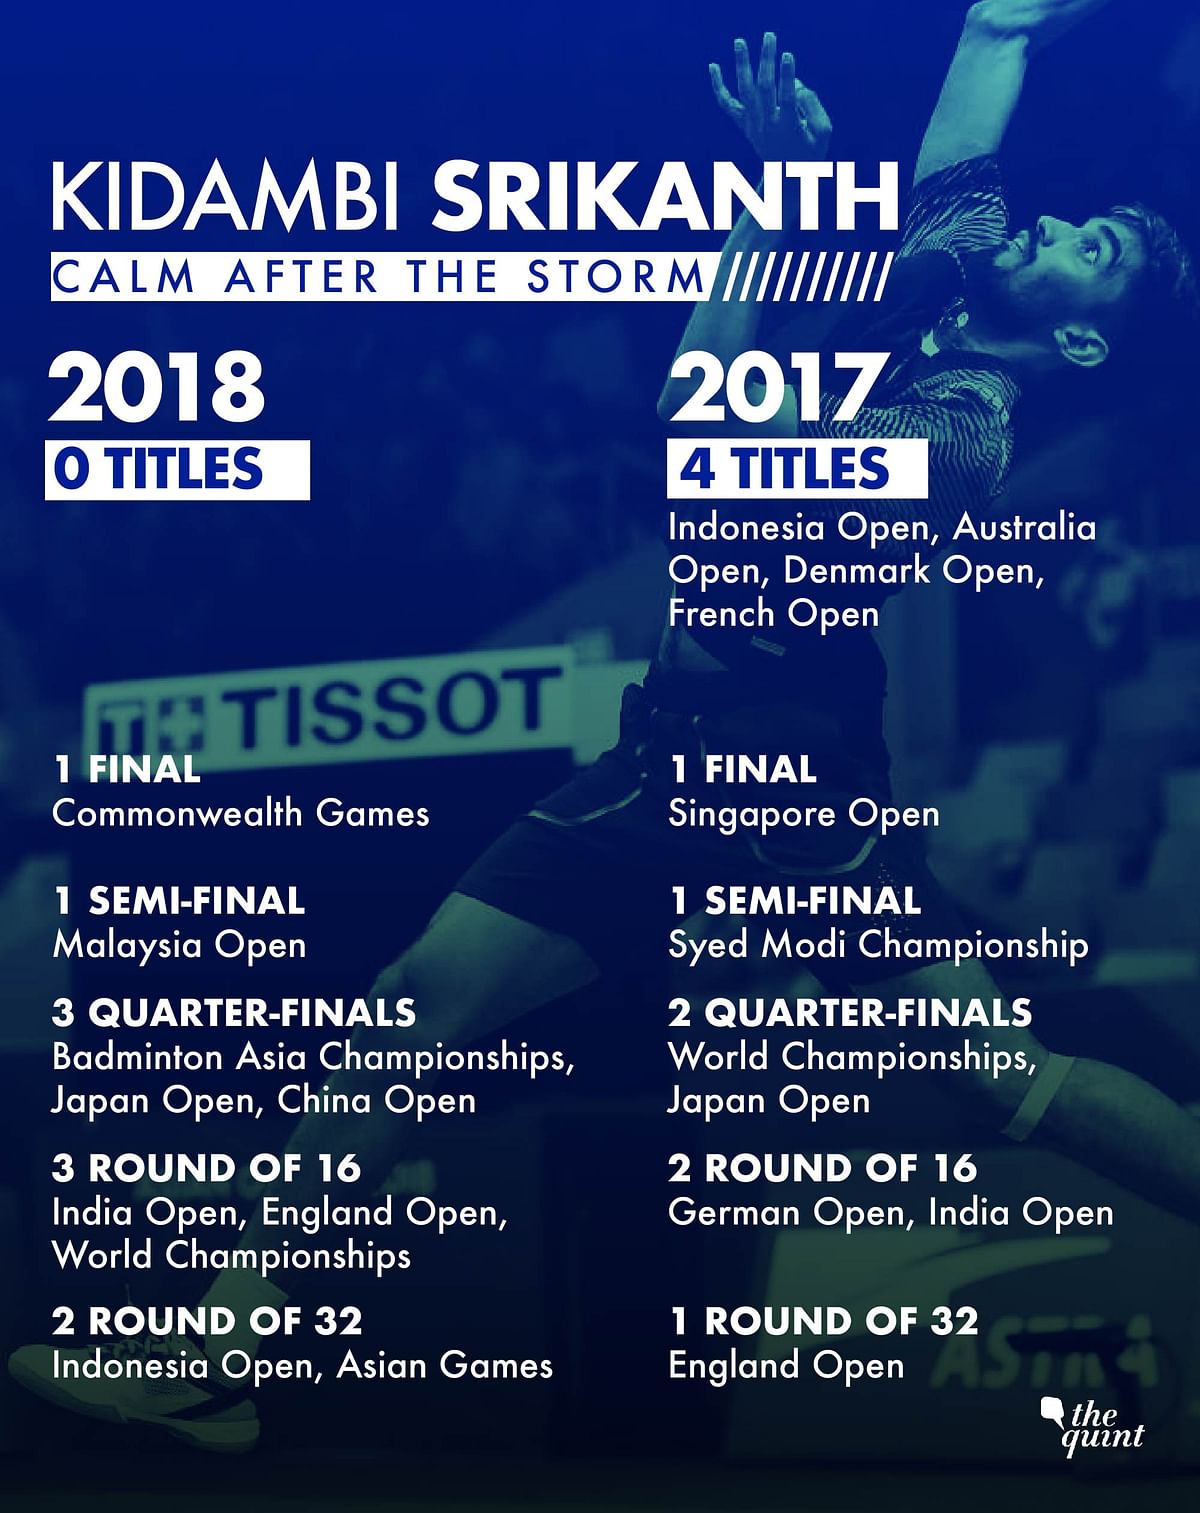 The year so far has been disappointing for the big names, with neither Sindhu nor Kidambi winning any major events.